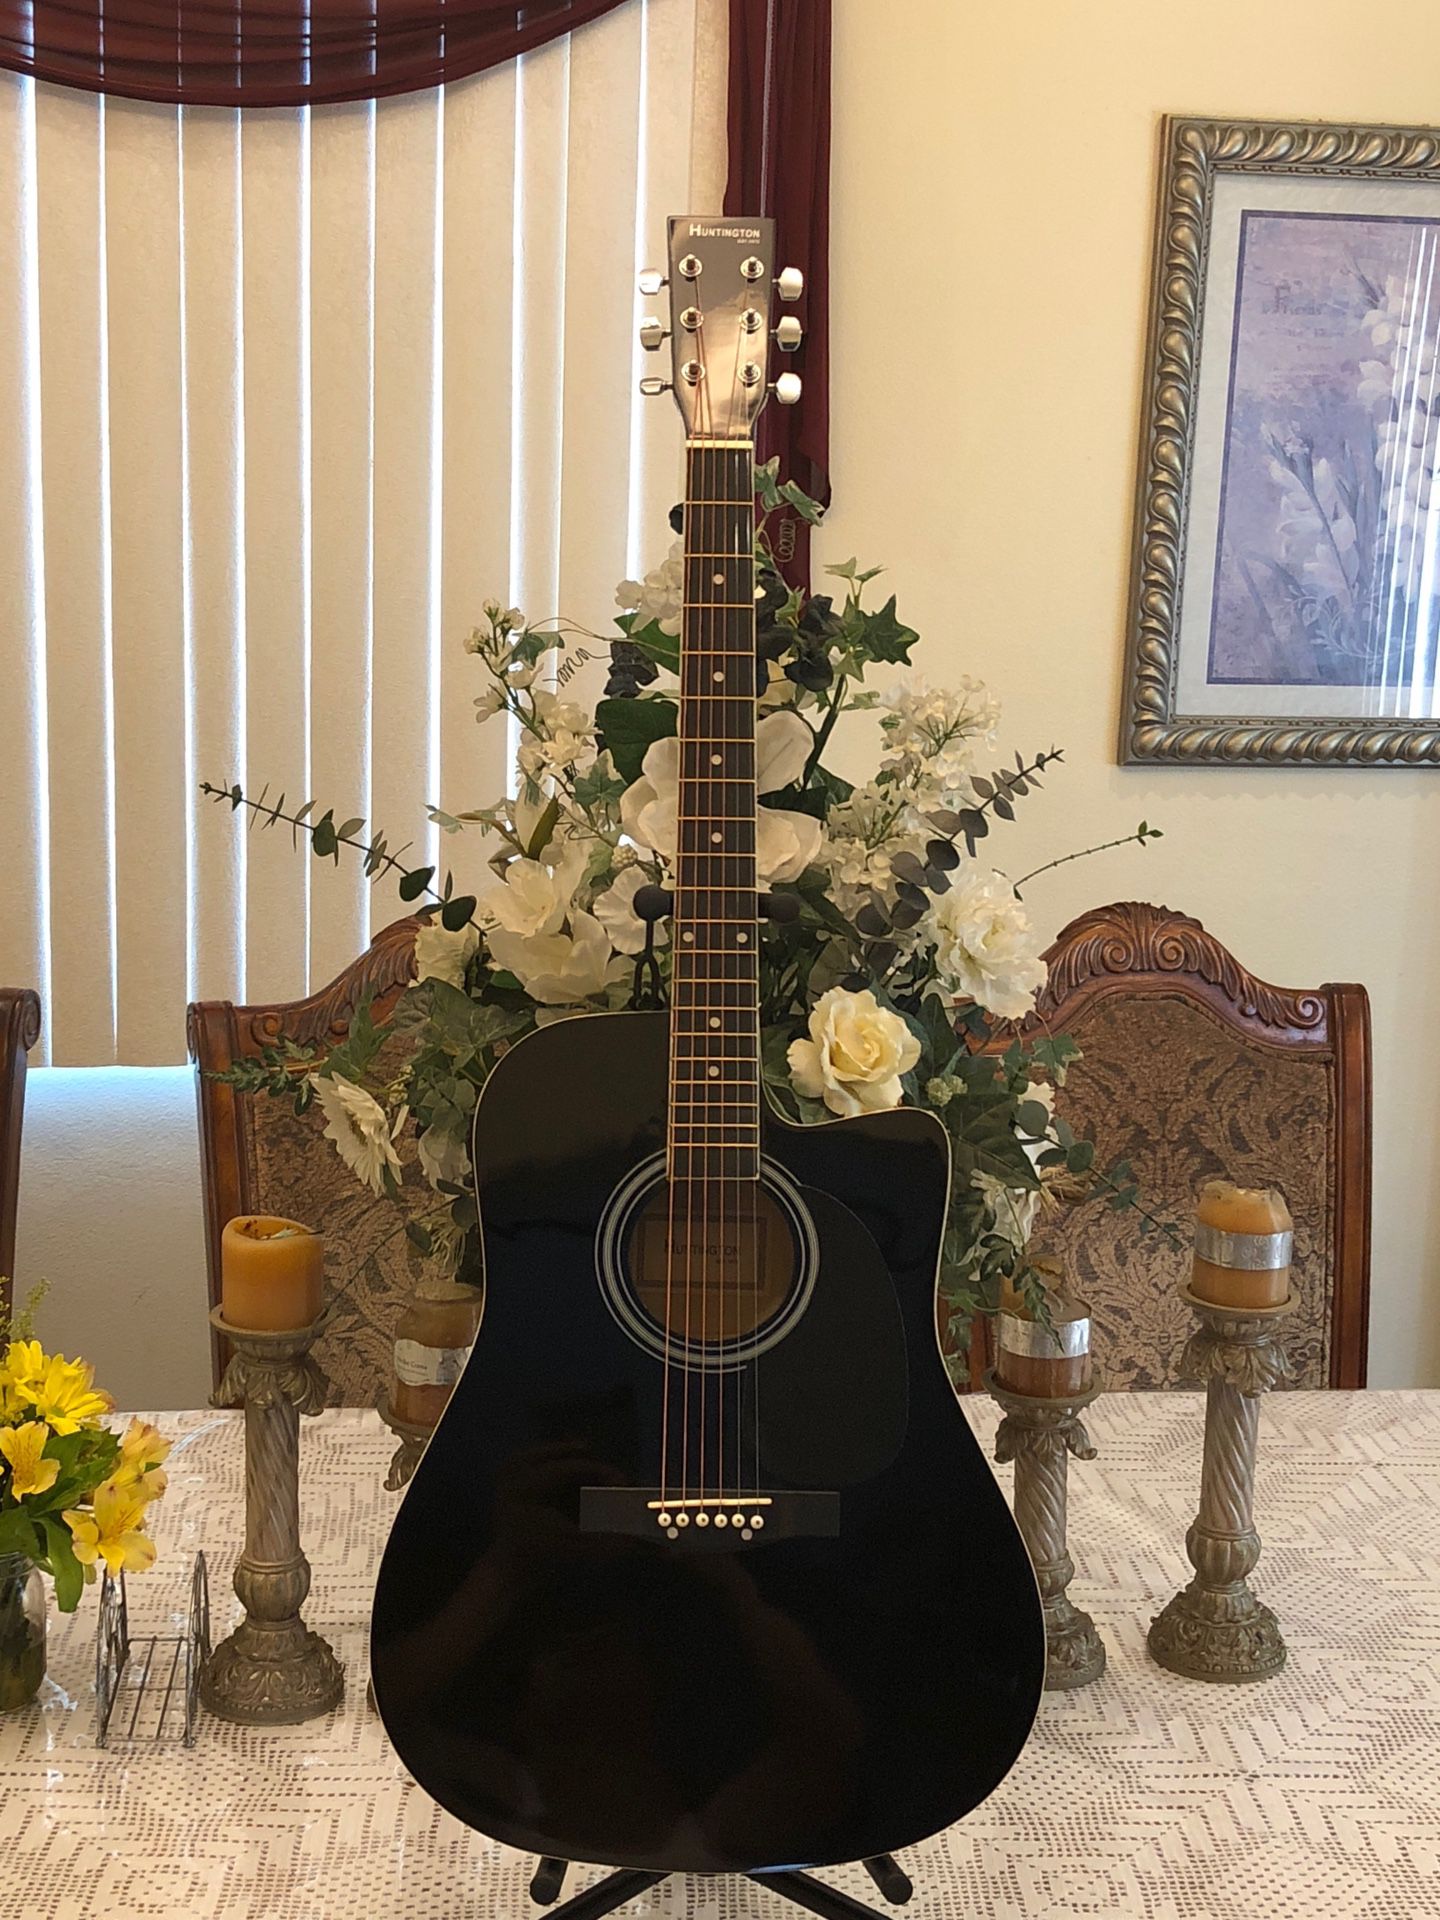 Huntington electric acoustic guitar with metal strings